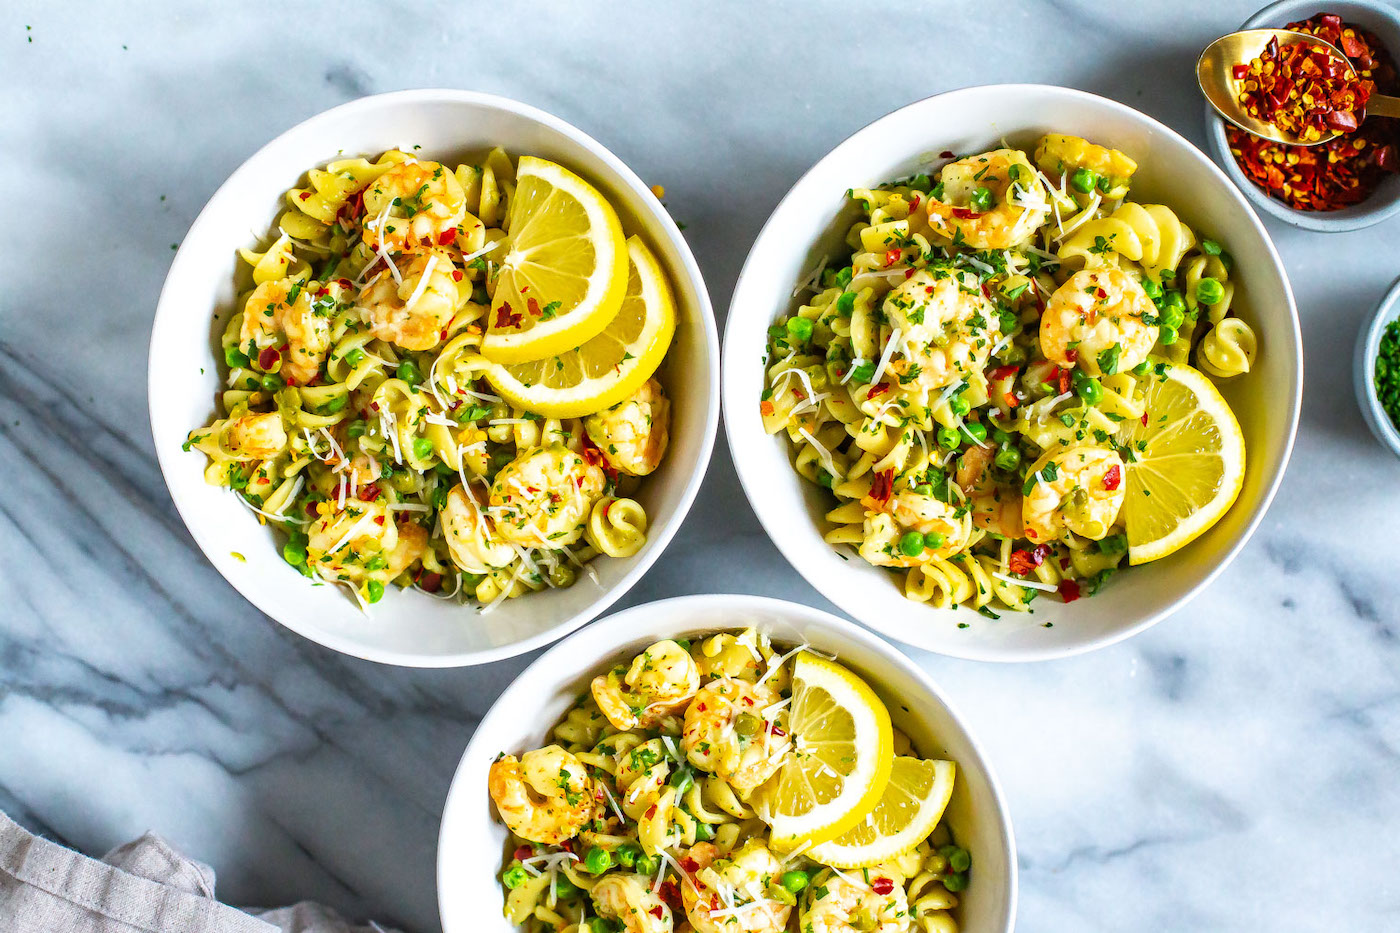 Healthy Shrimp Recipes To Make for Quick Dinners